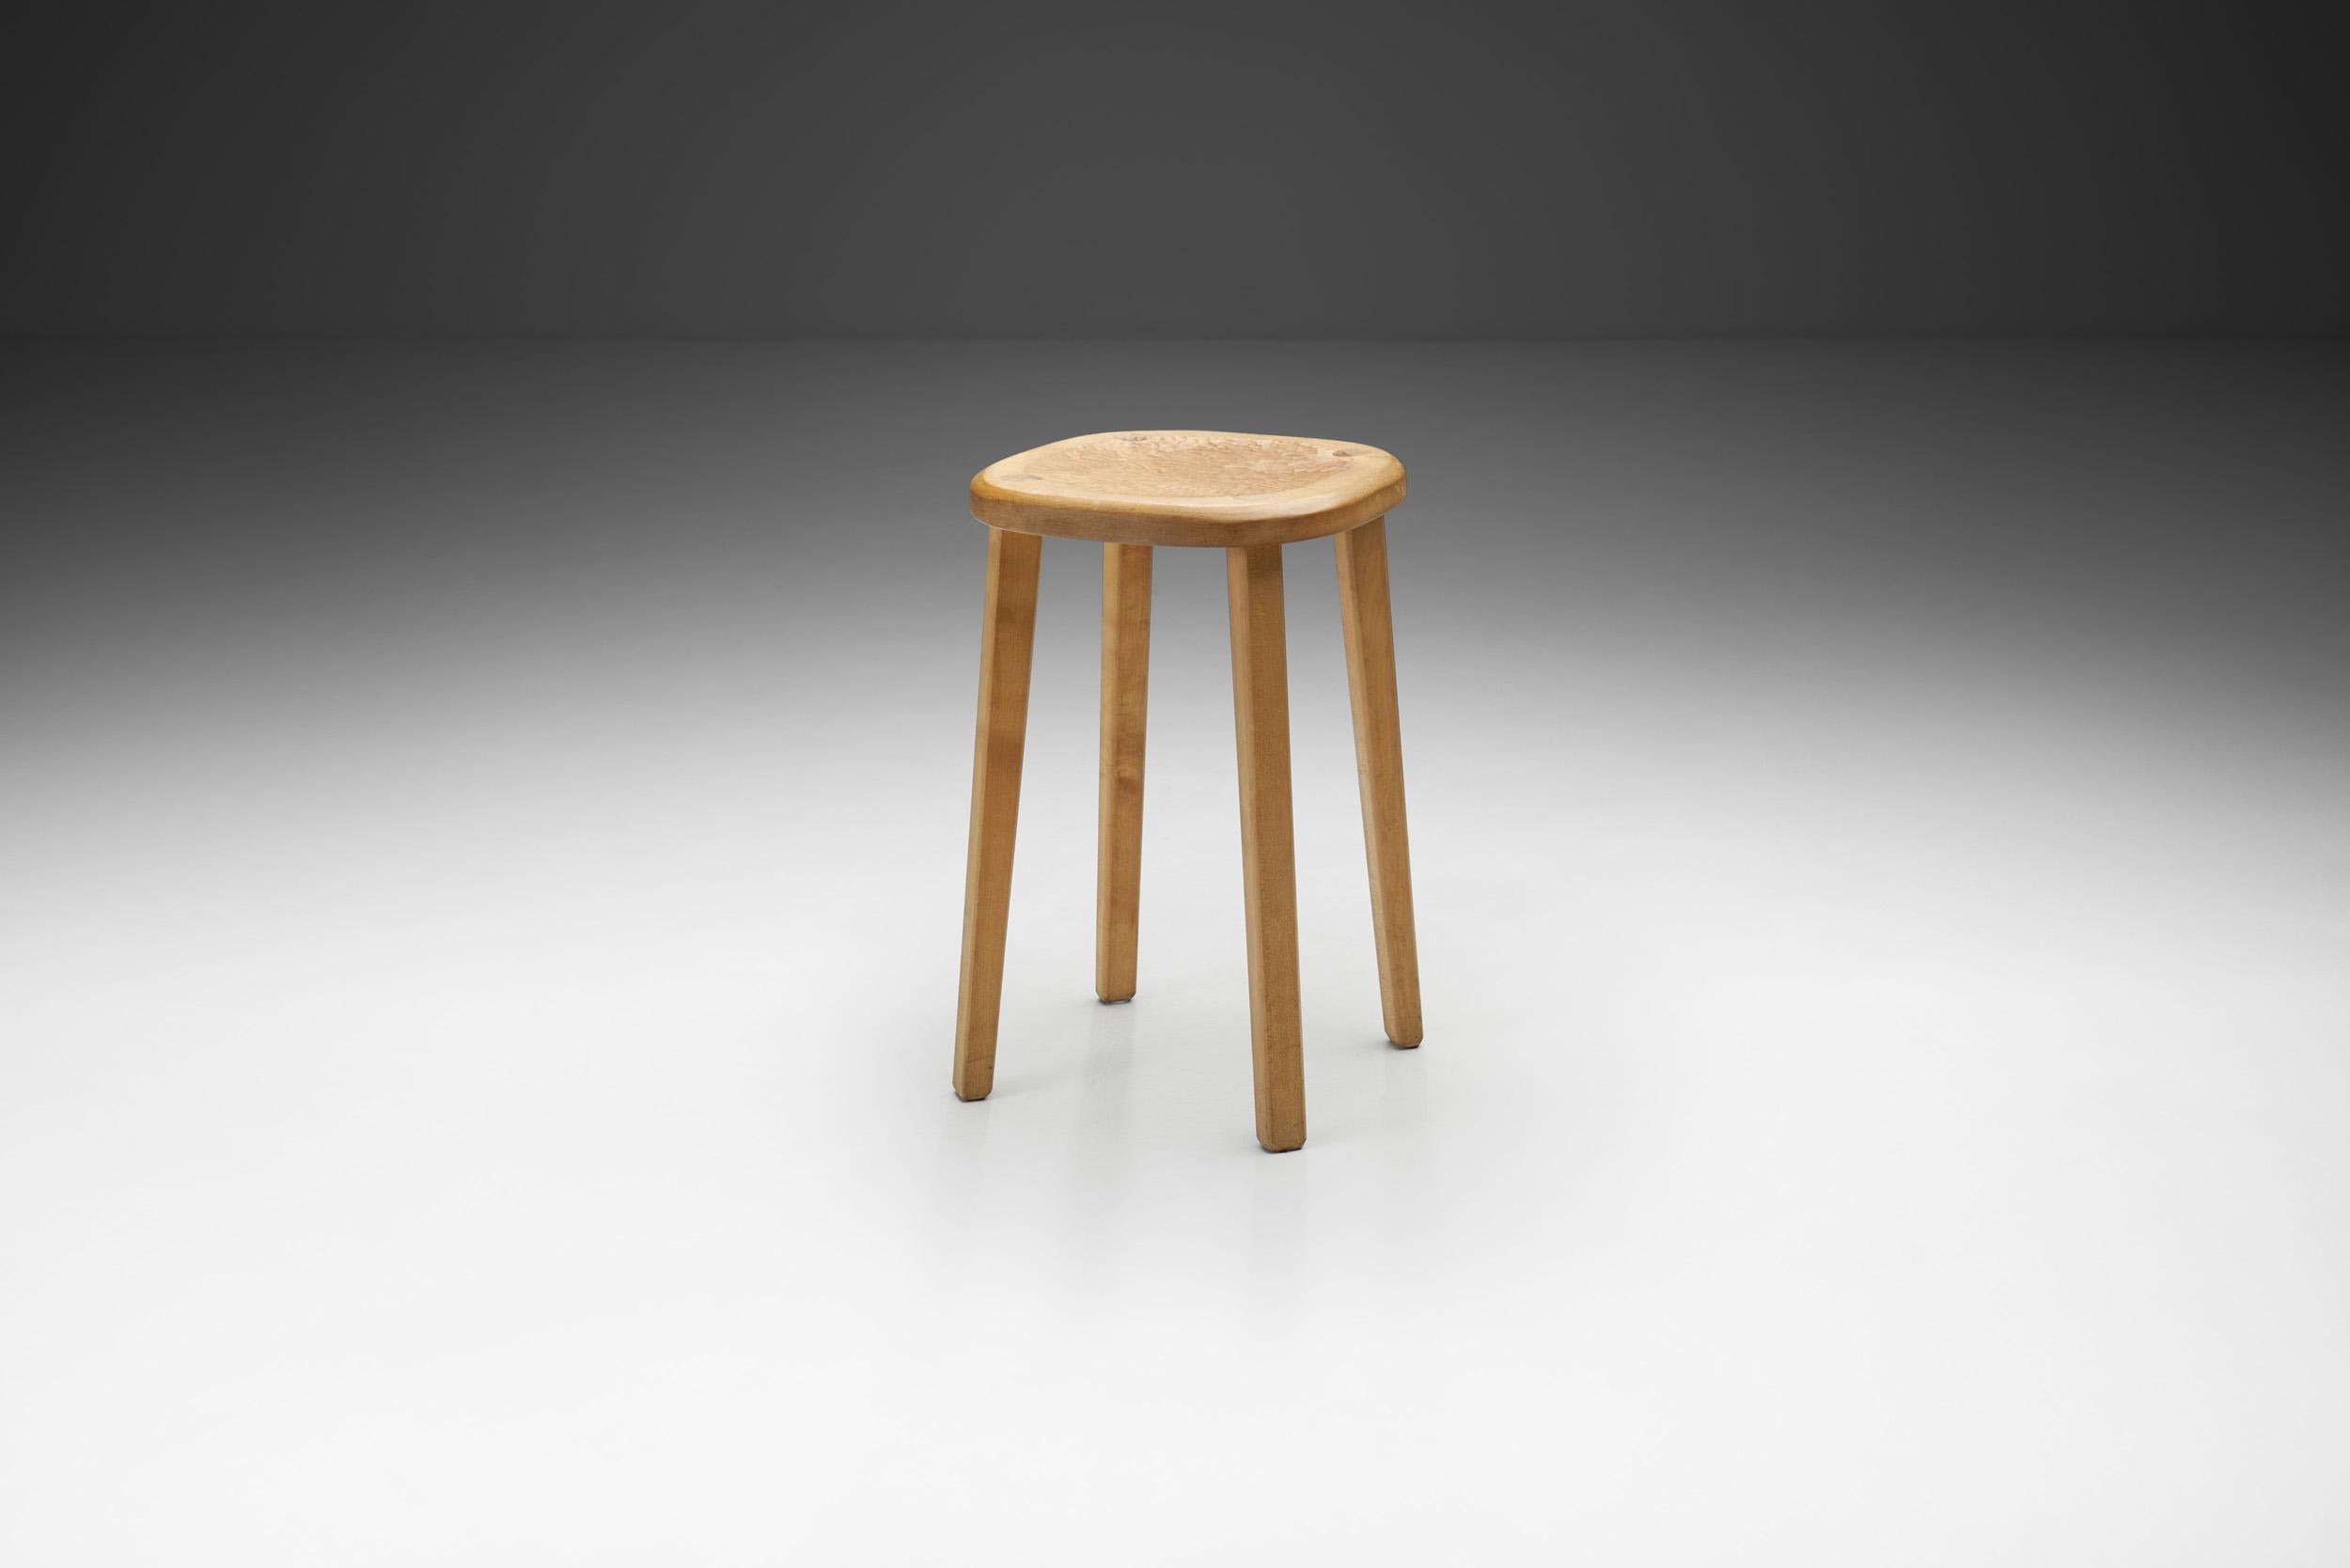 Form and function collide in this Swiss stool, a piece of furniture that is often underestimated. Designers define stools as jewels and statements in a space, and taking practicality into account, this stool is perfect to add visual interest to any